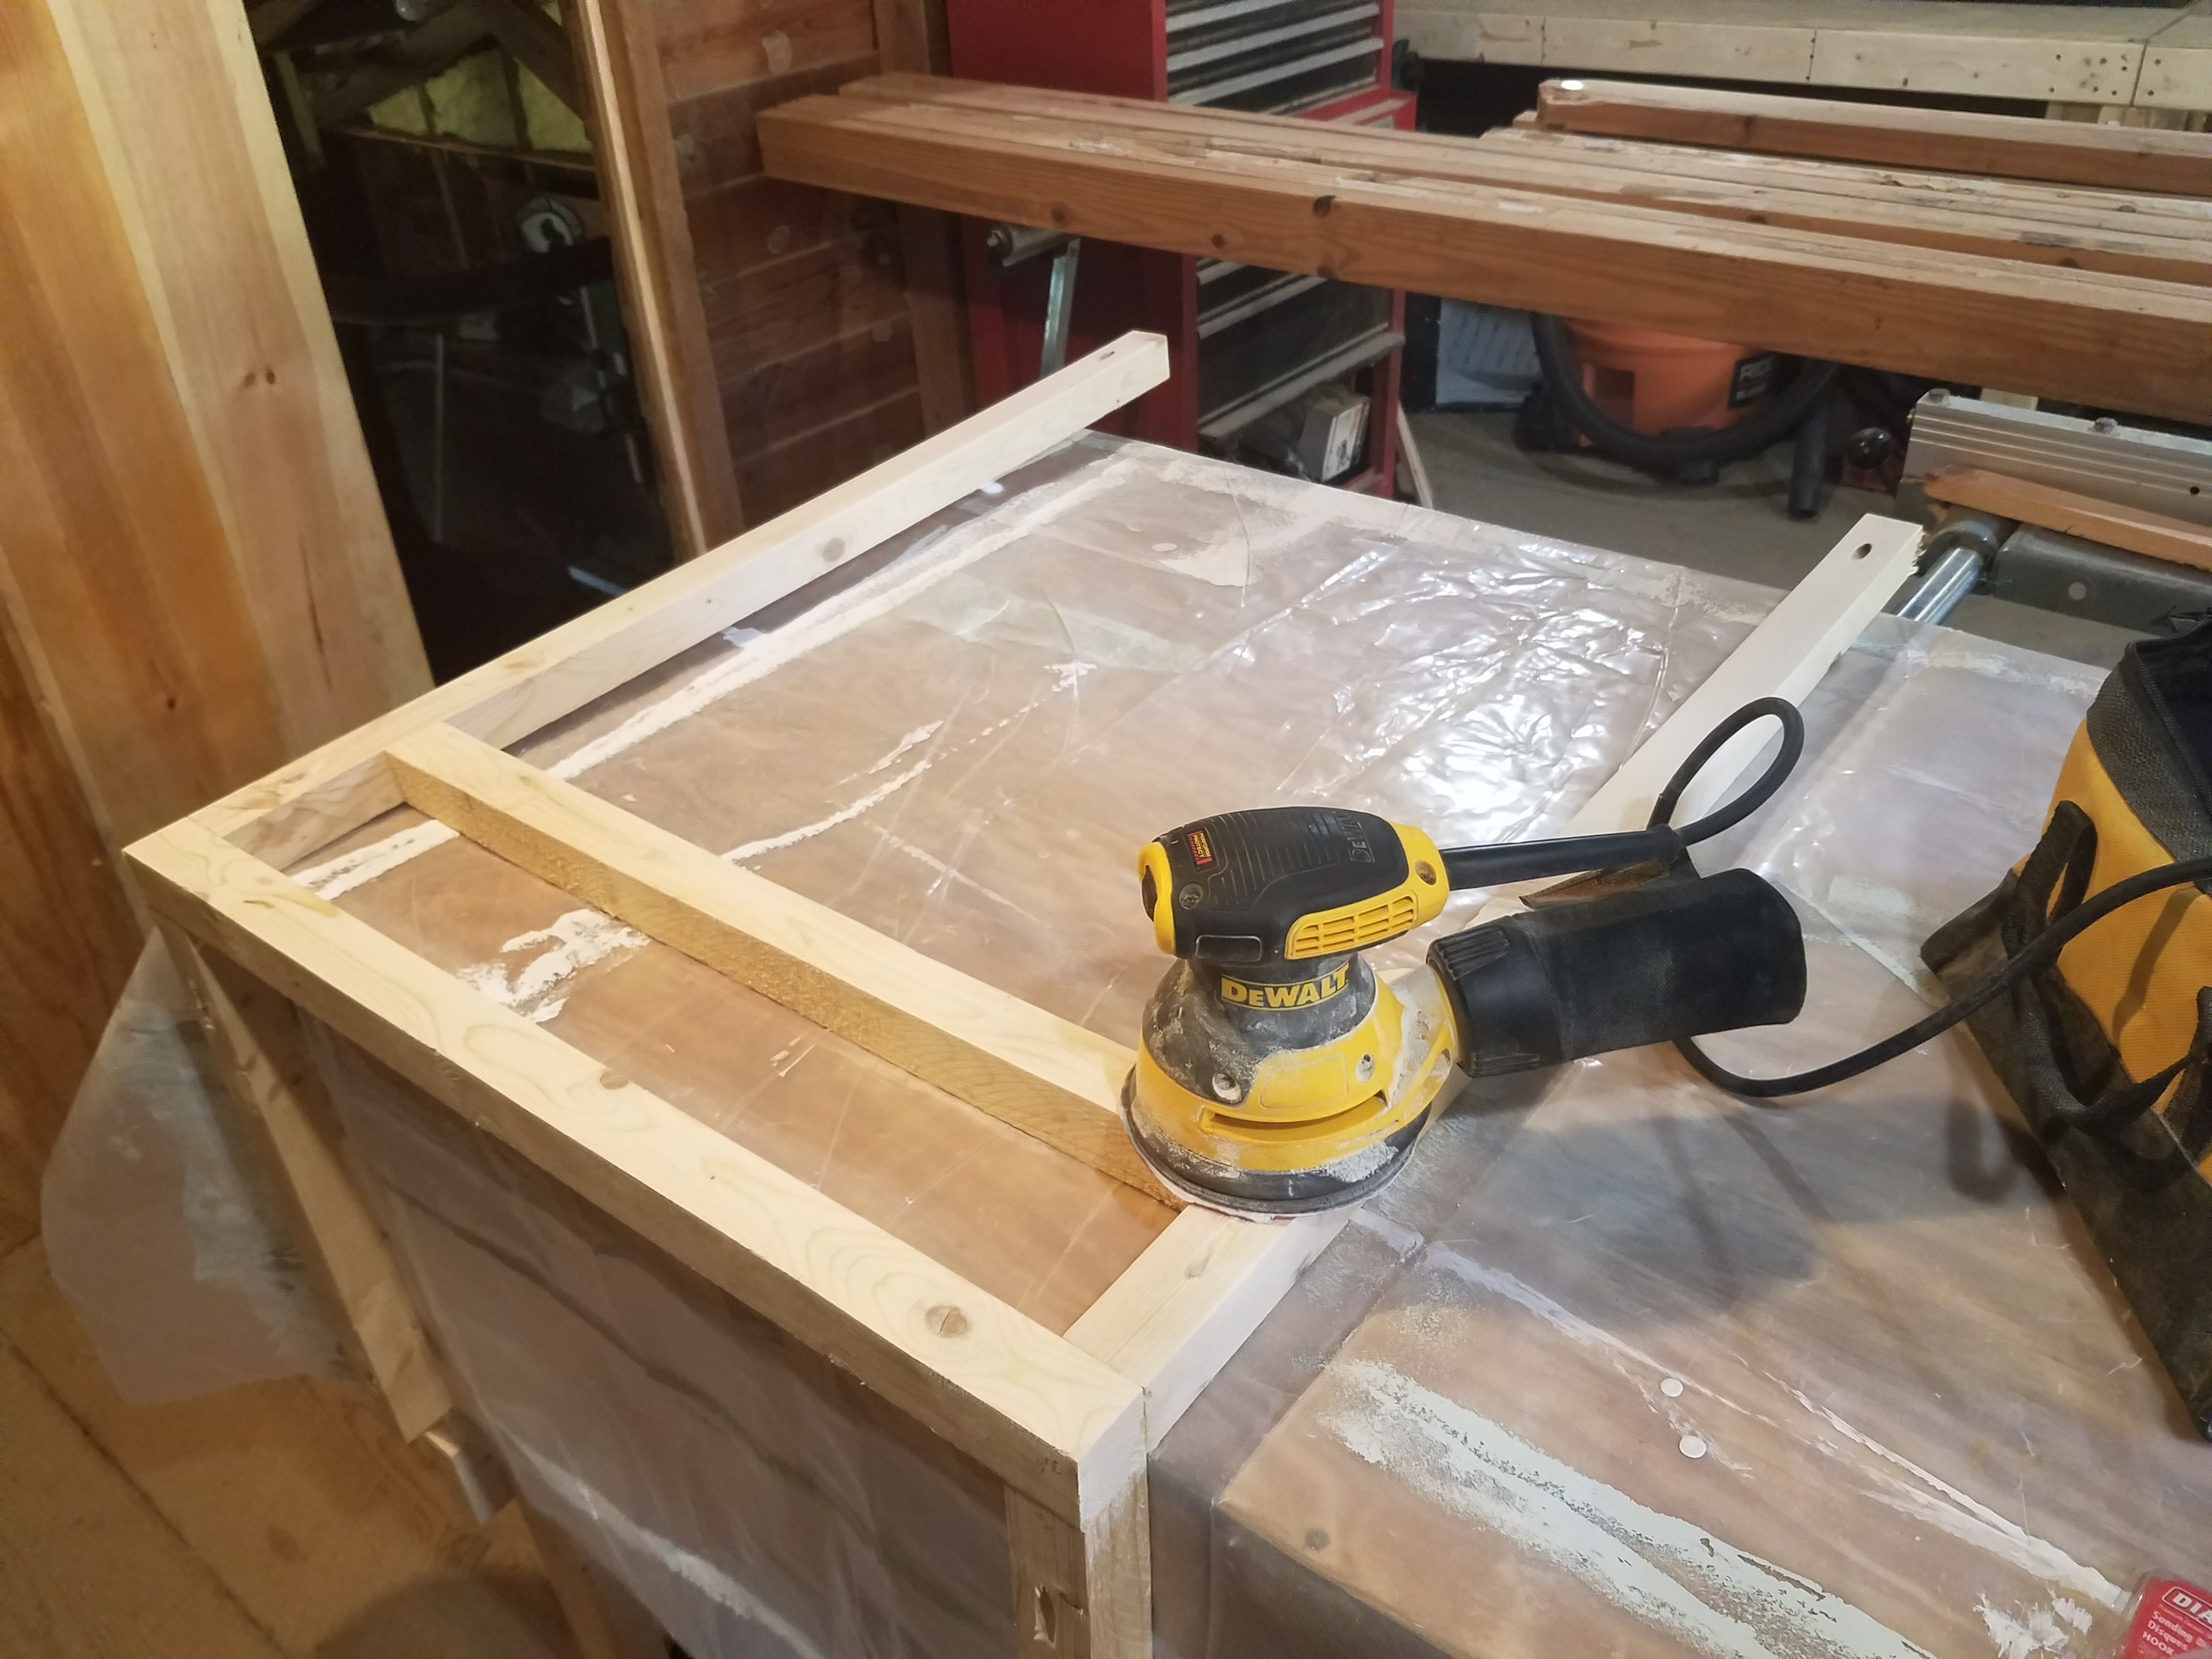 Sanding the frame of the kitchen cabinets for the travel trailer